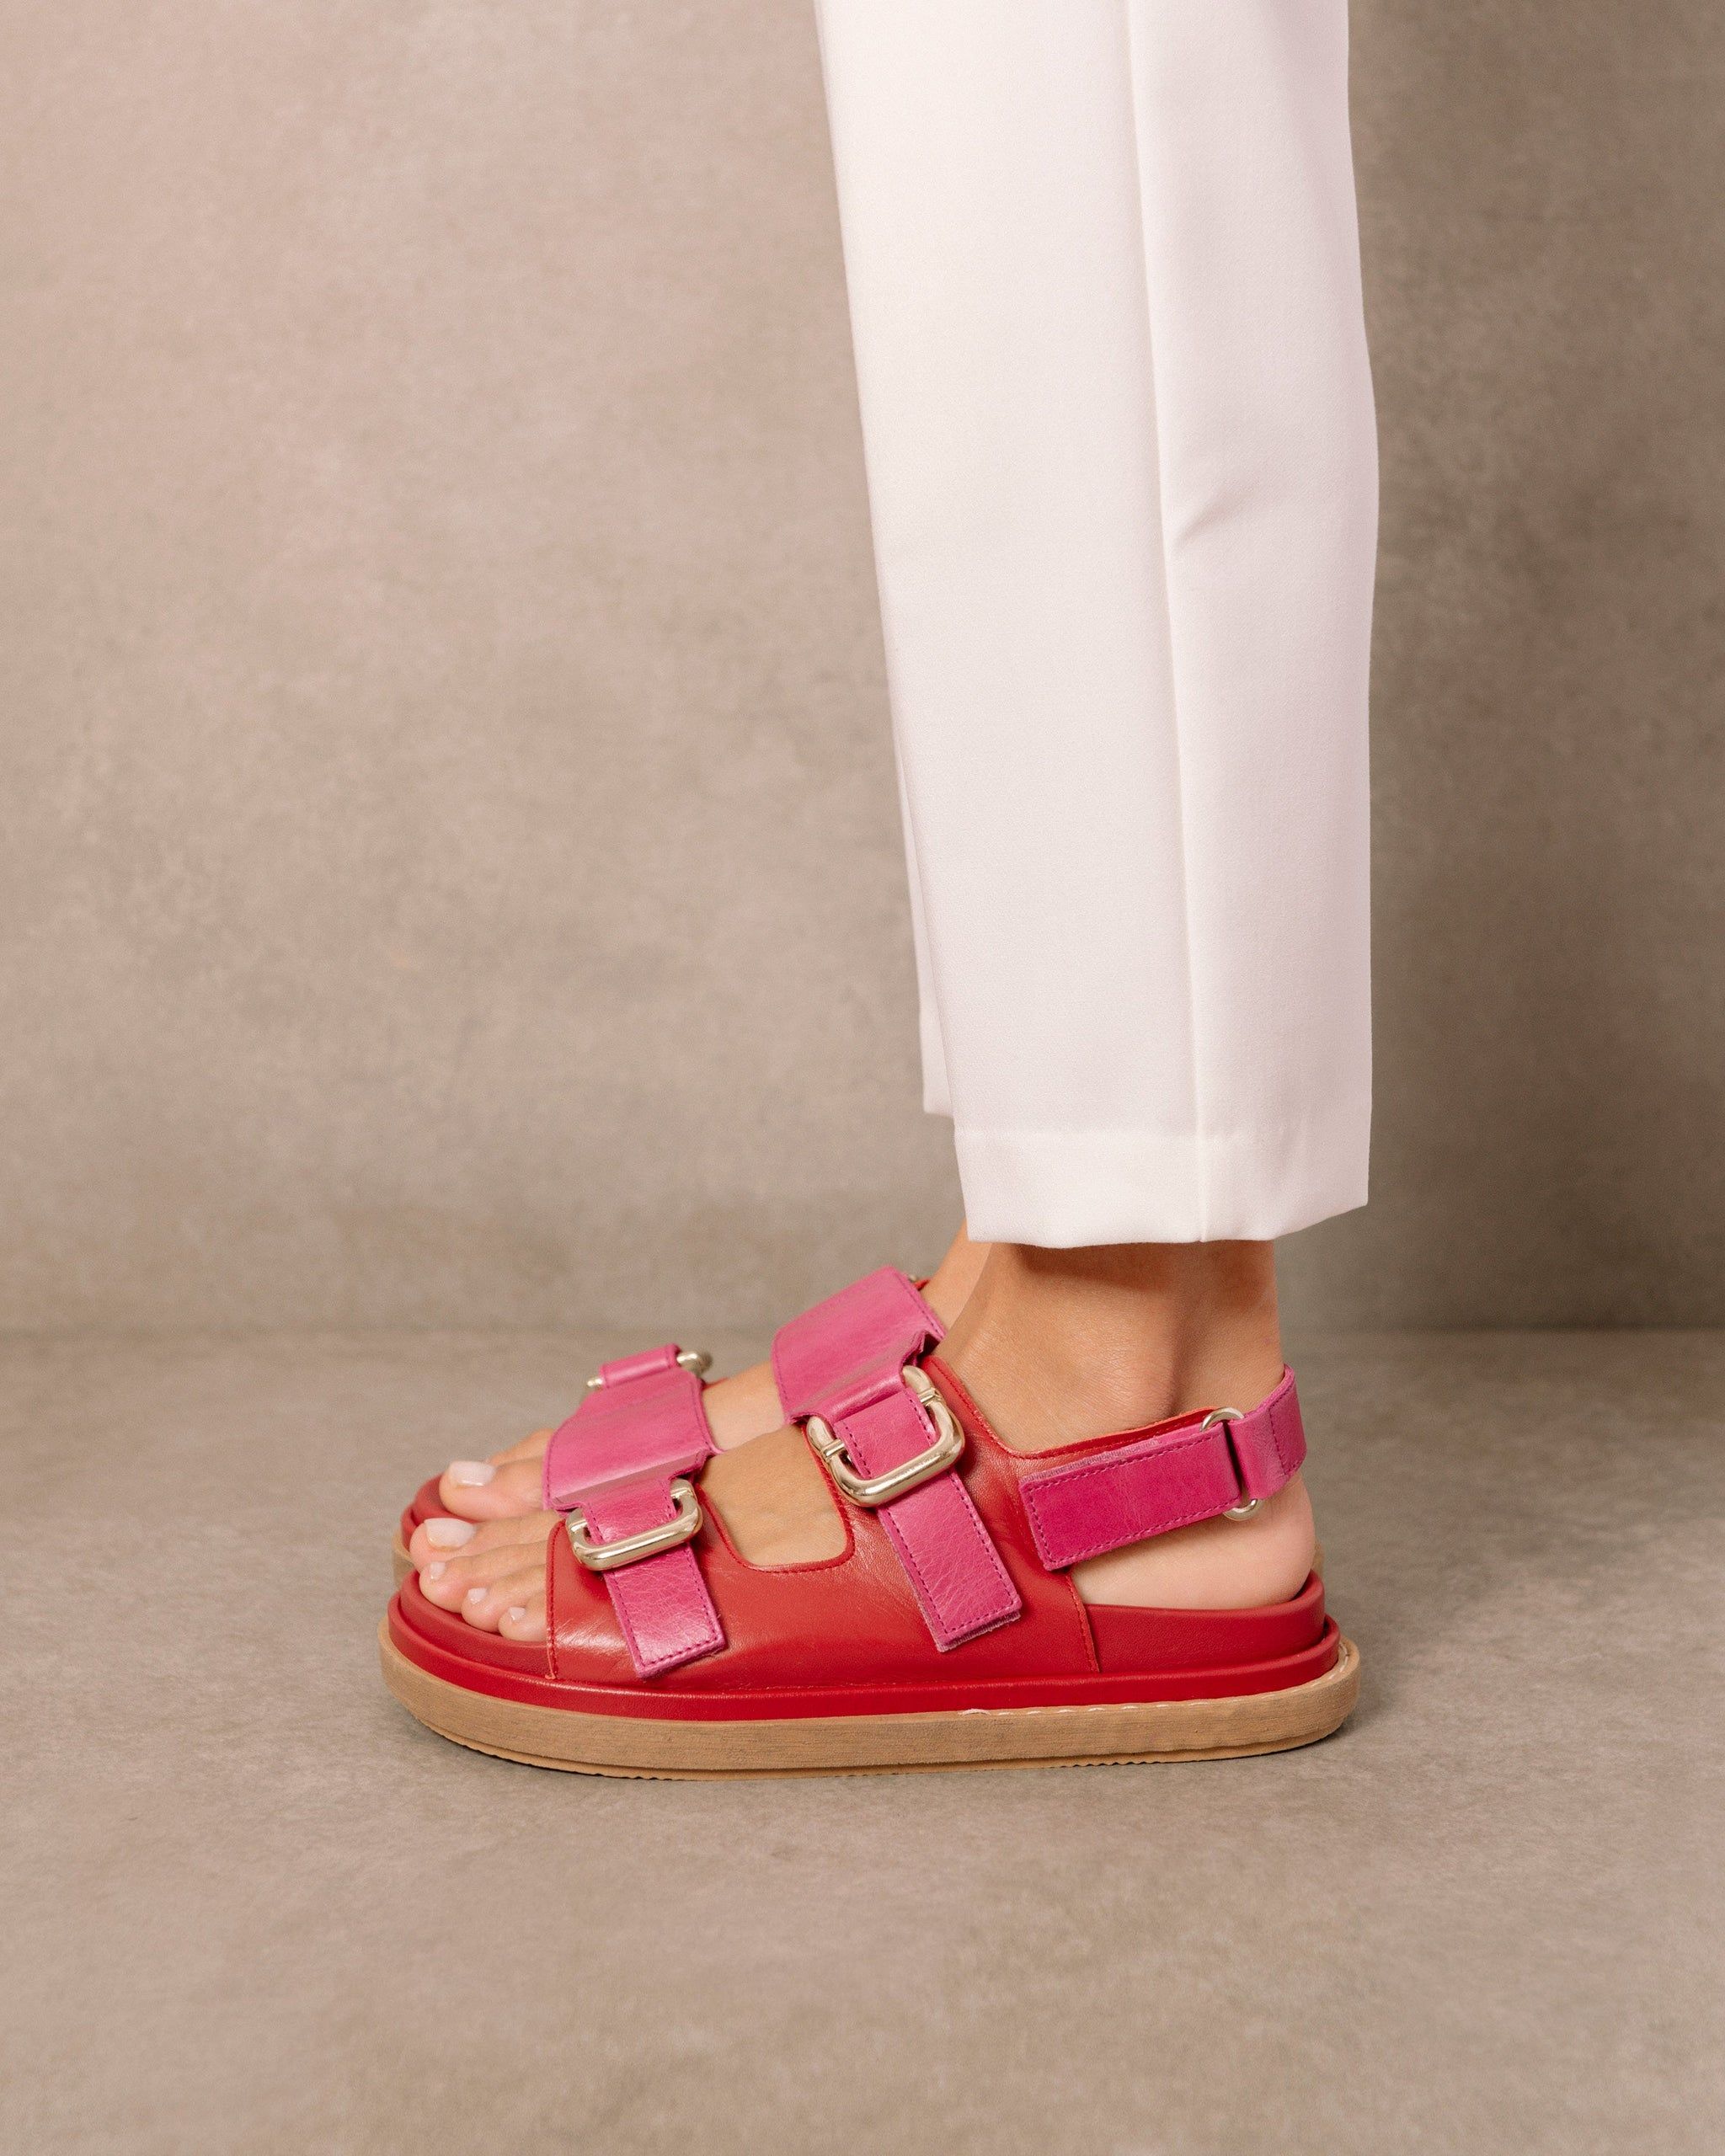 Harper - Red and Pink Leather Sandals